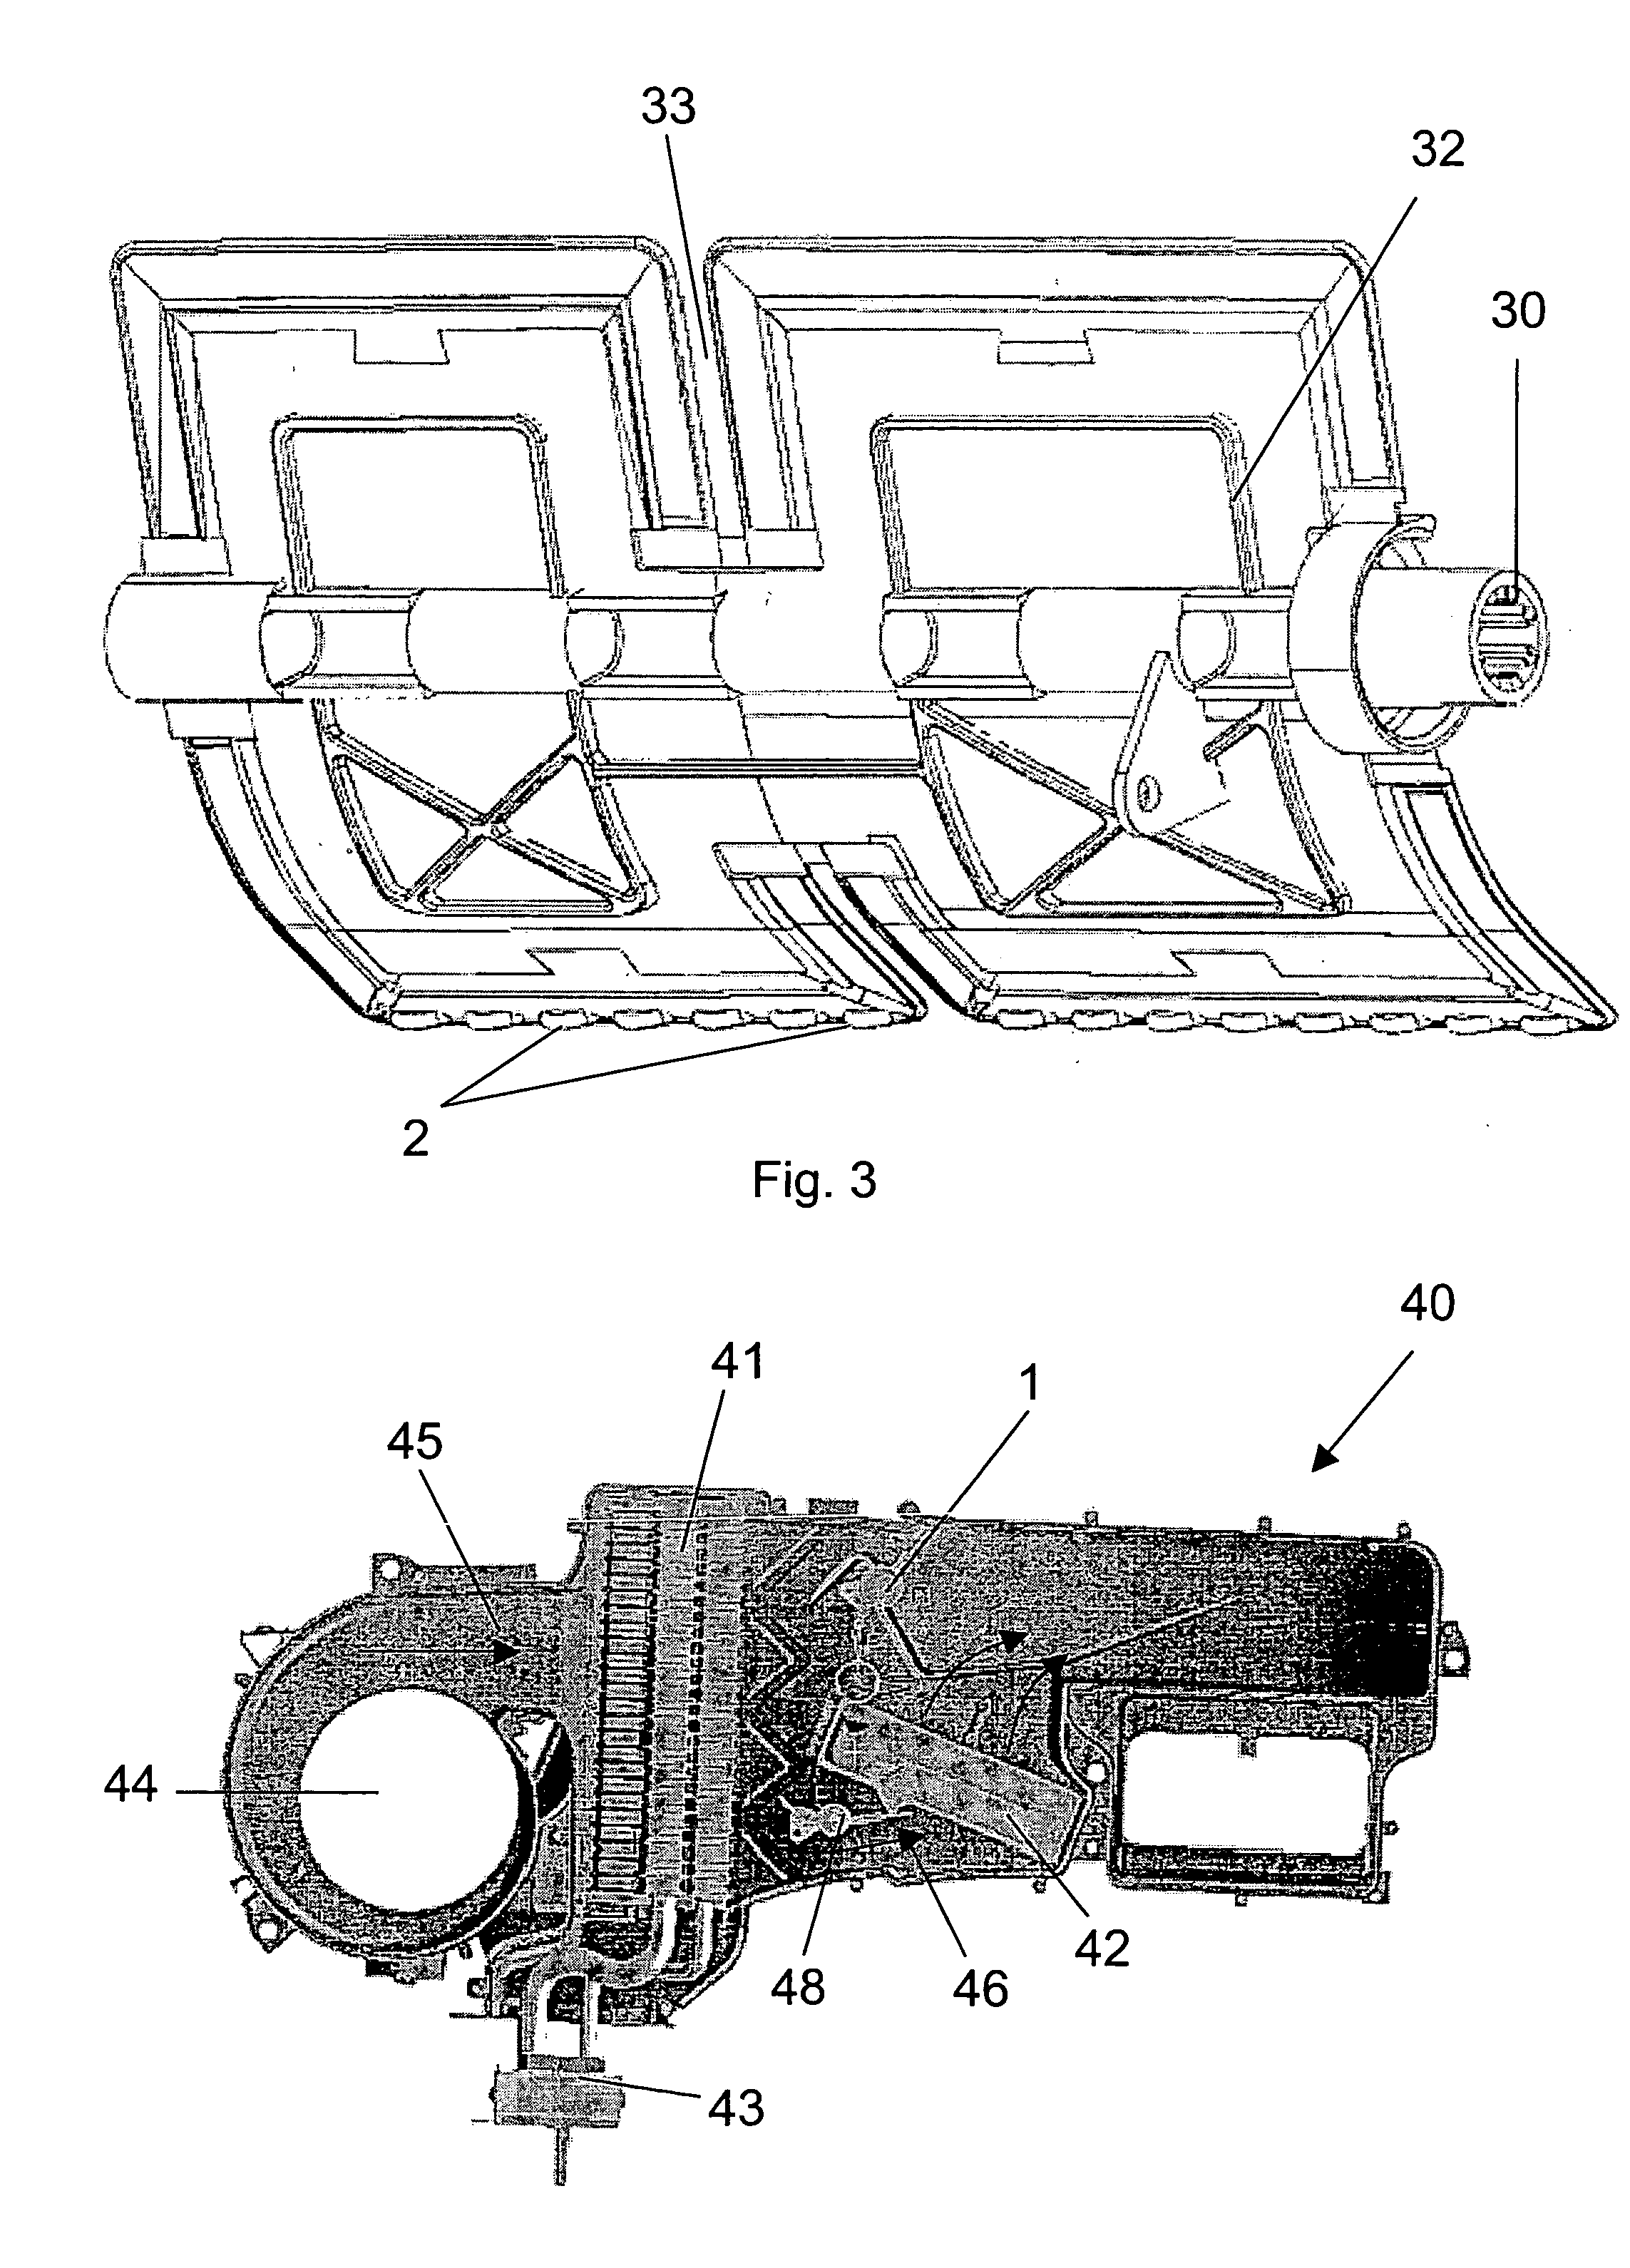 Control valve for a ventilation system of an automobile